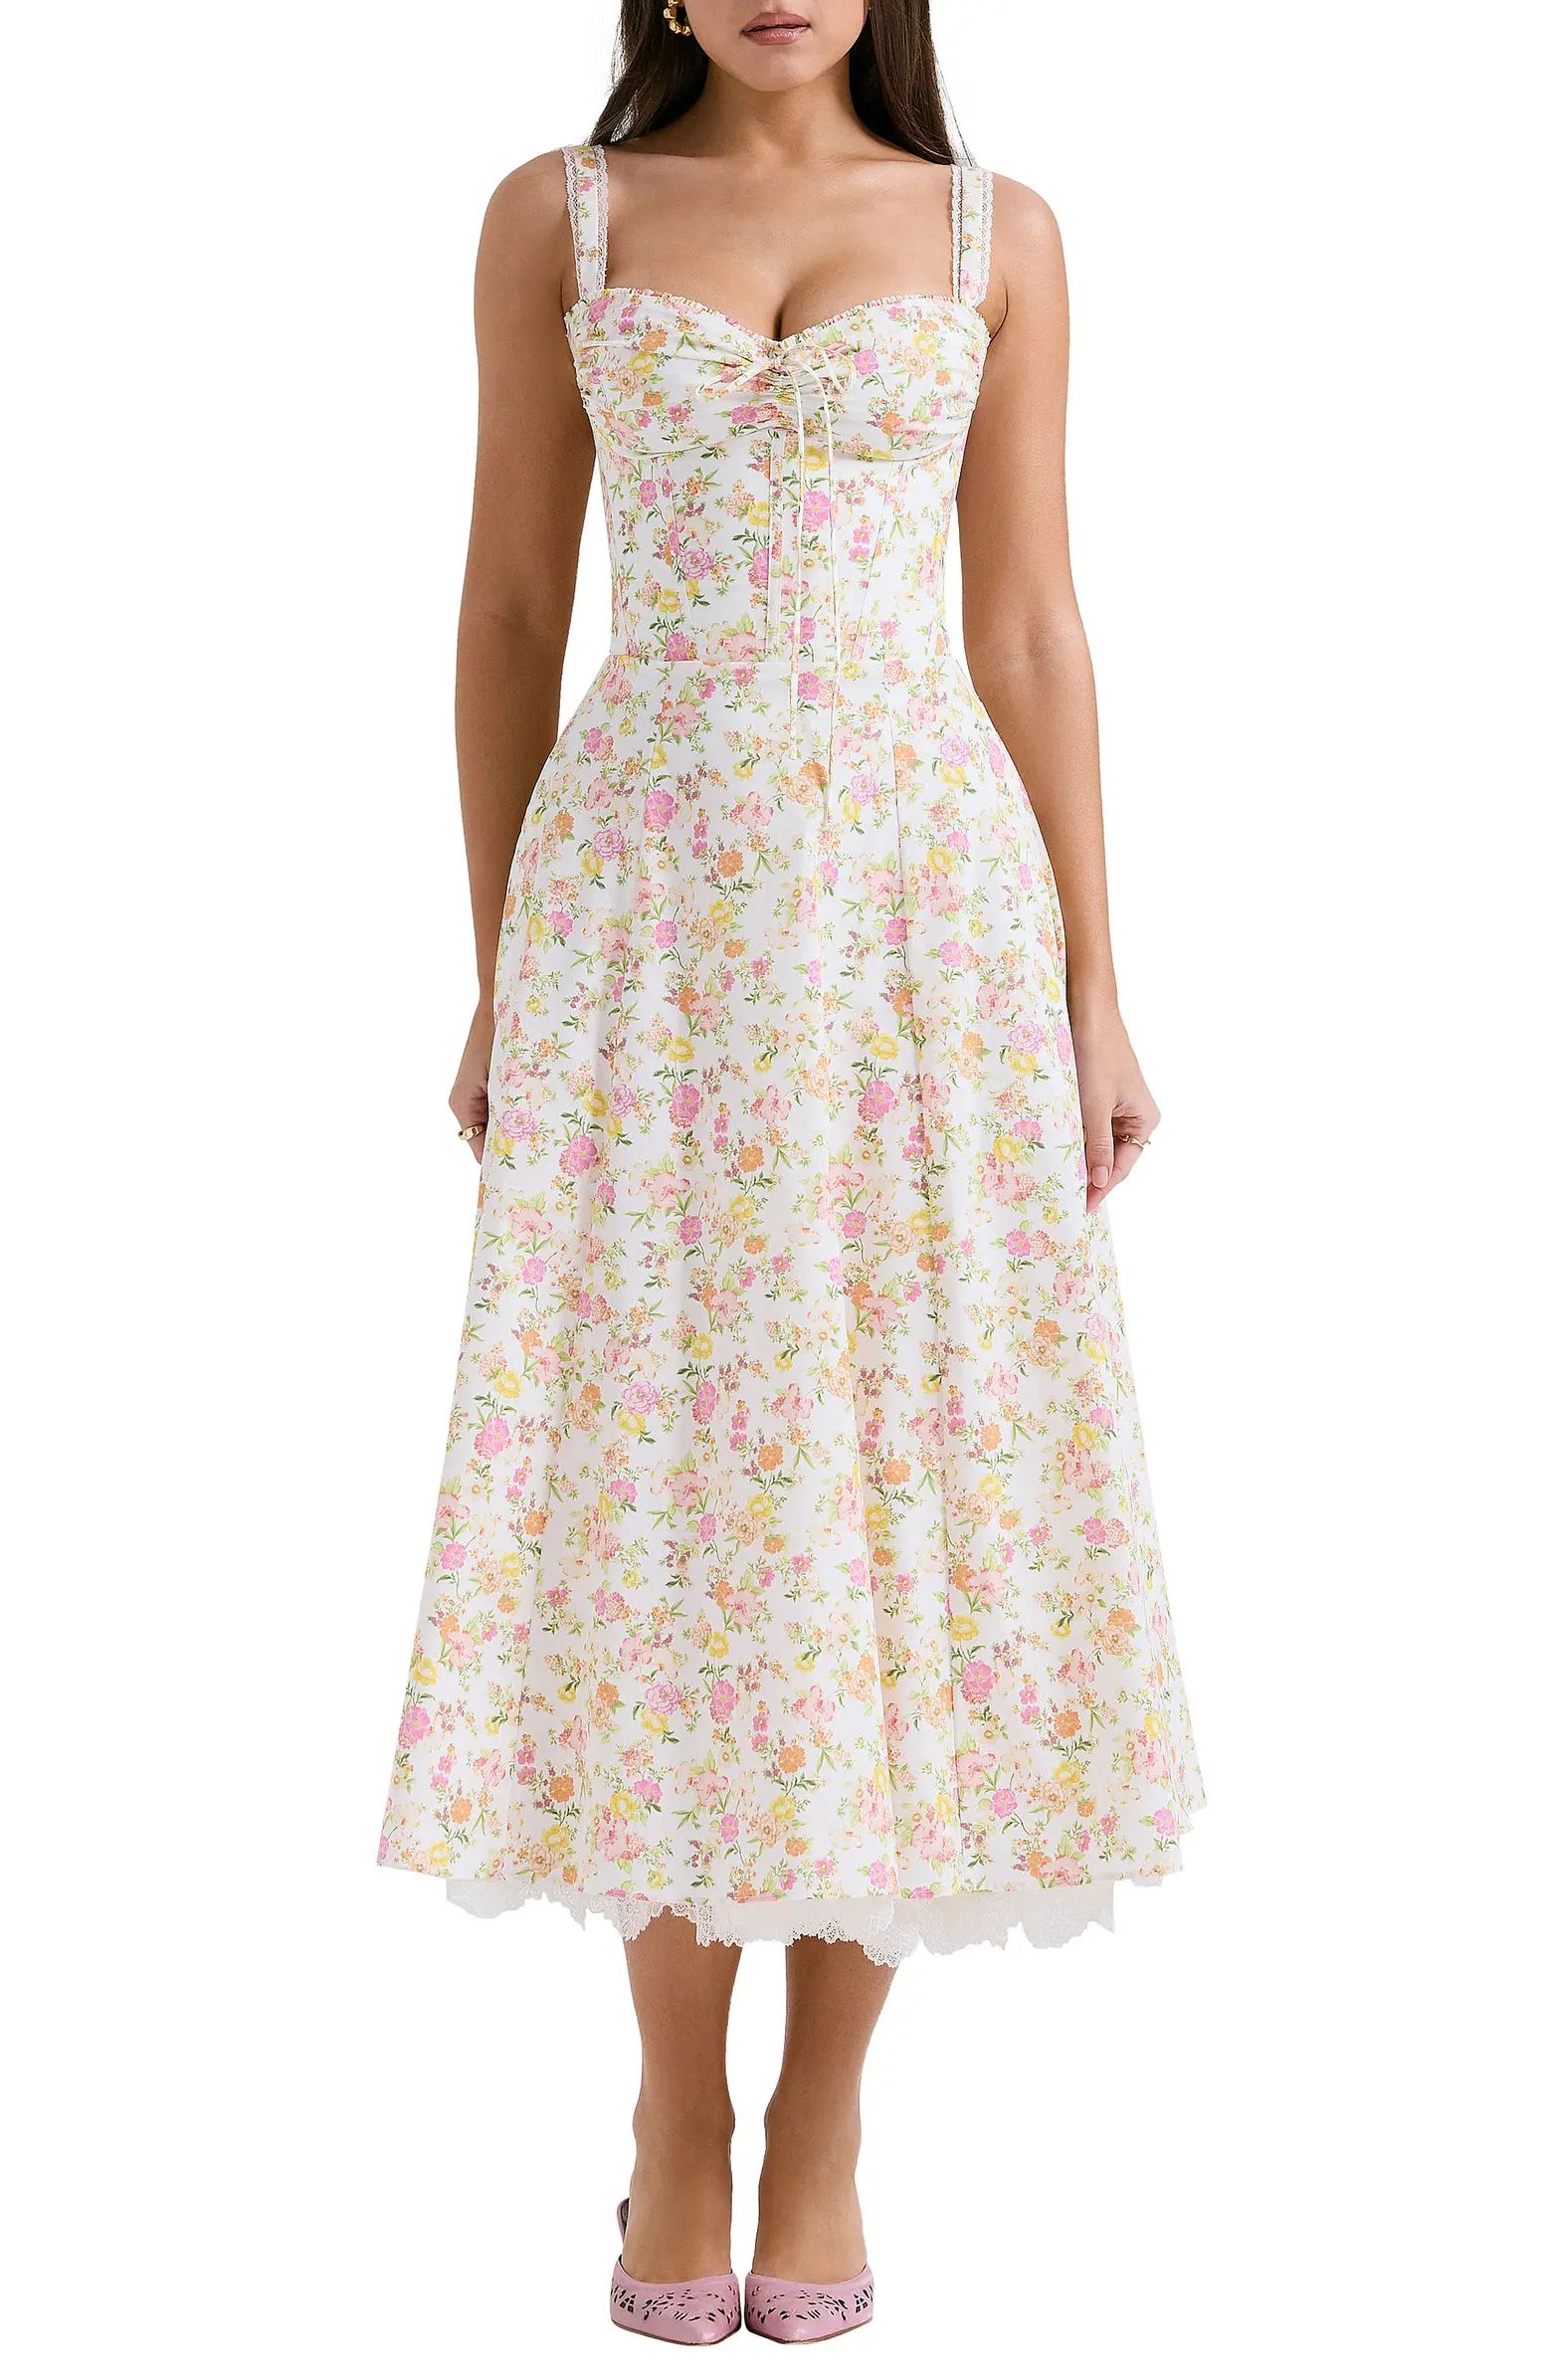 Rosalee Floral Stretch Cotton Petticoat Dress | Nordstrom